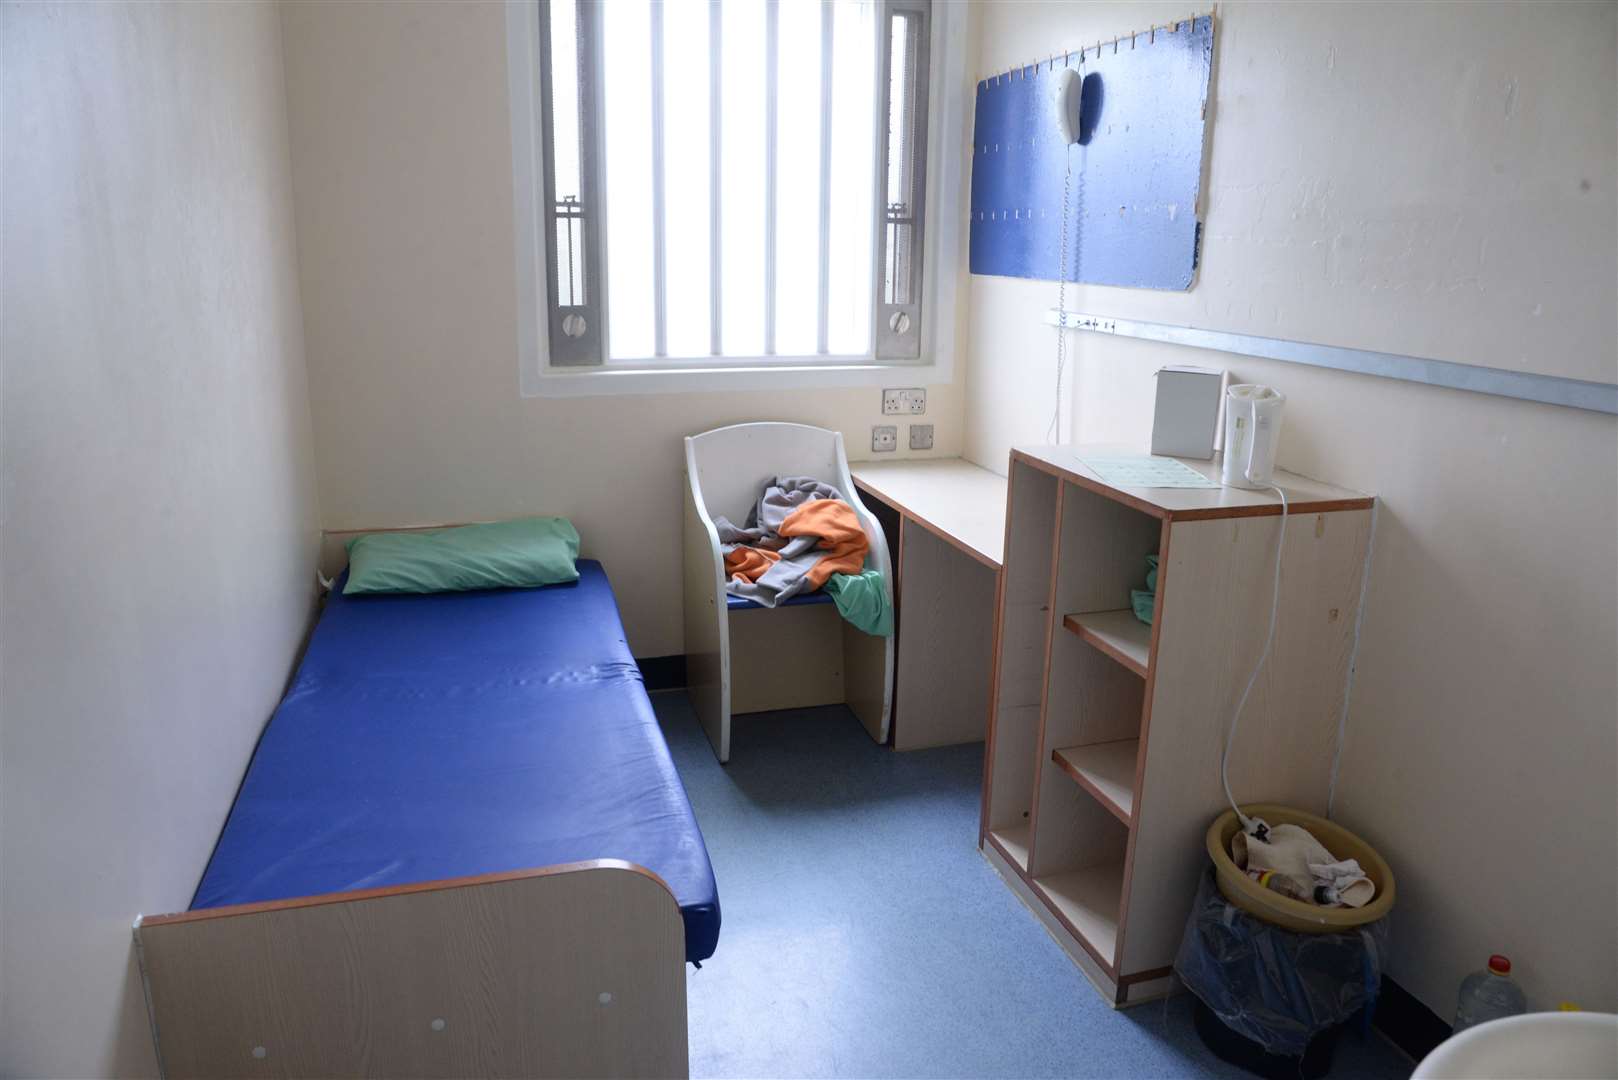 A cell at HMP Swaleside similar to that occupied by Derrick Johnston